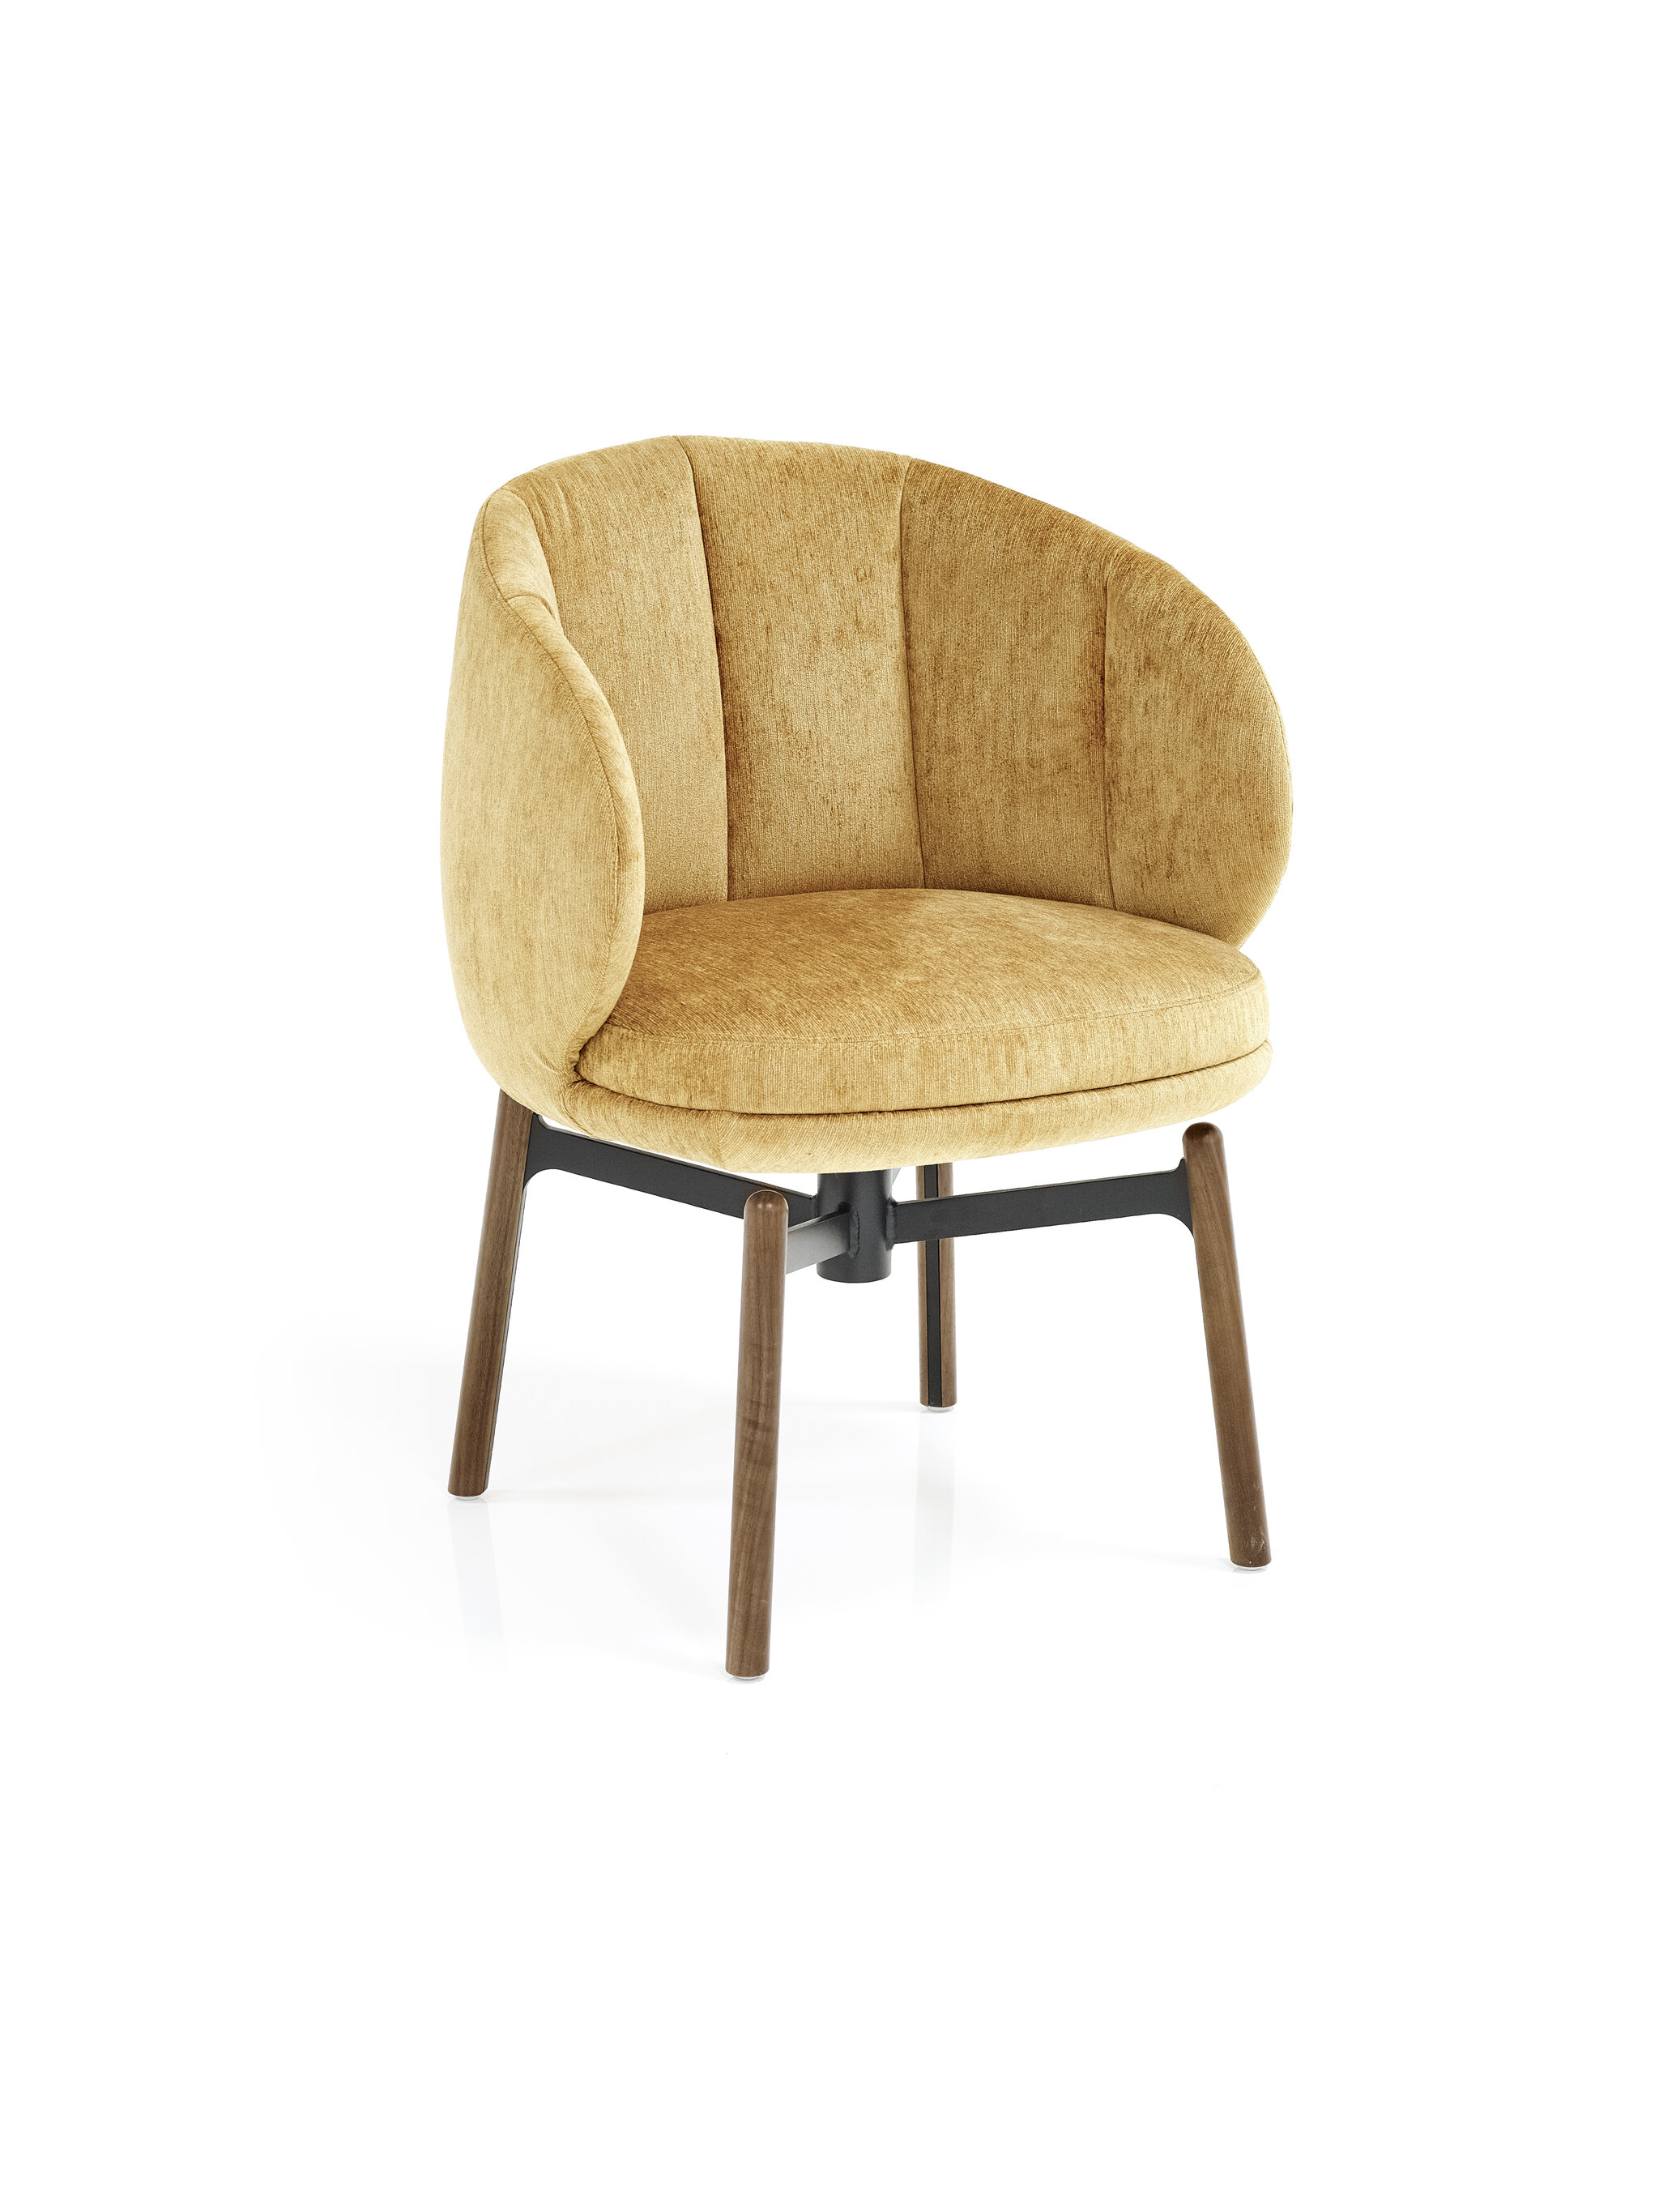 Vuelta FD Chair in gold velvet upholstery with swivel base with wooden legs